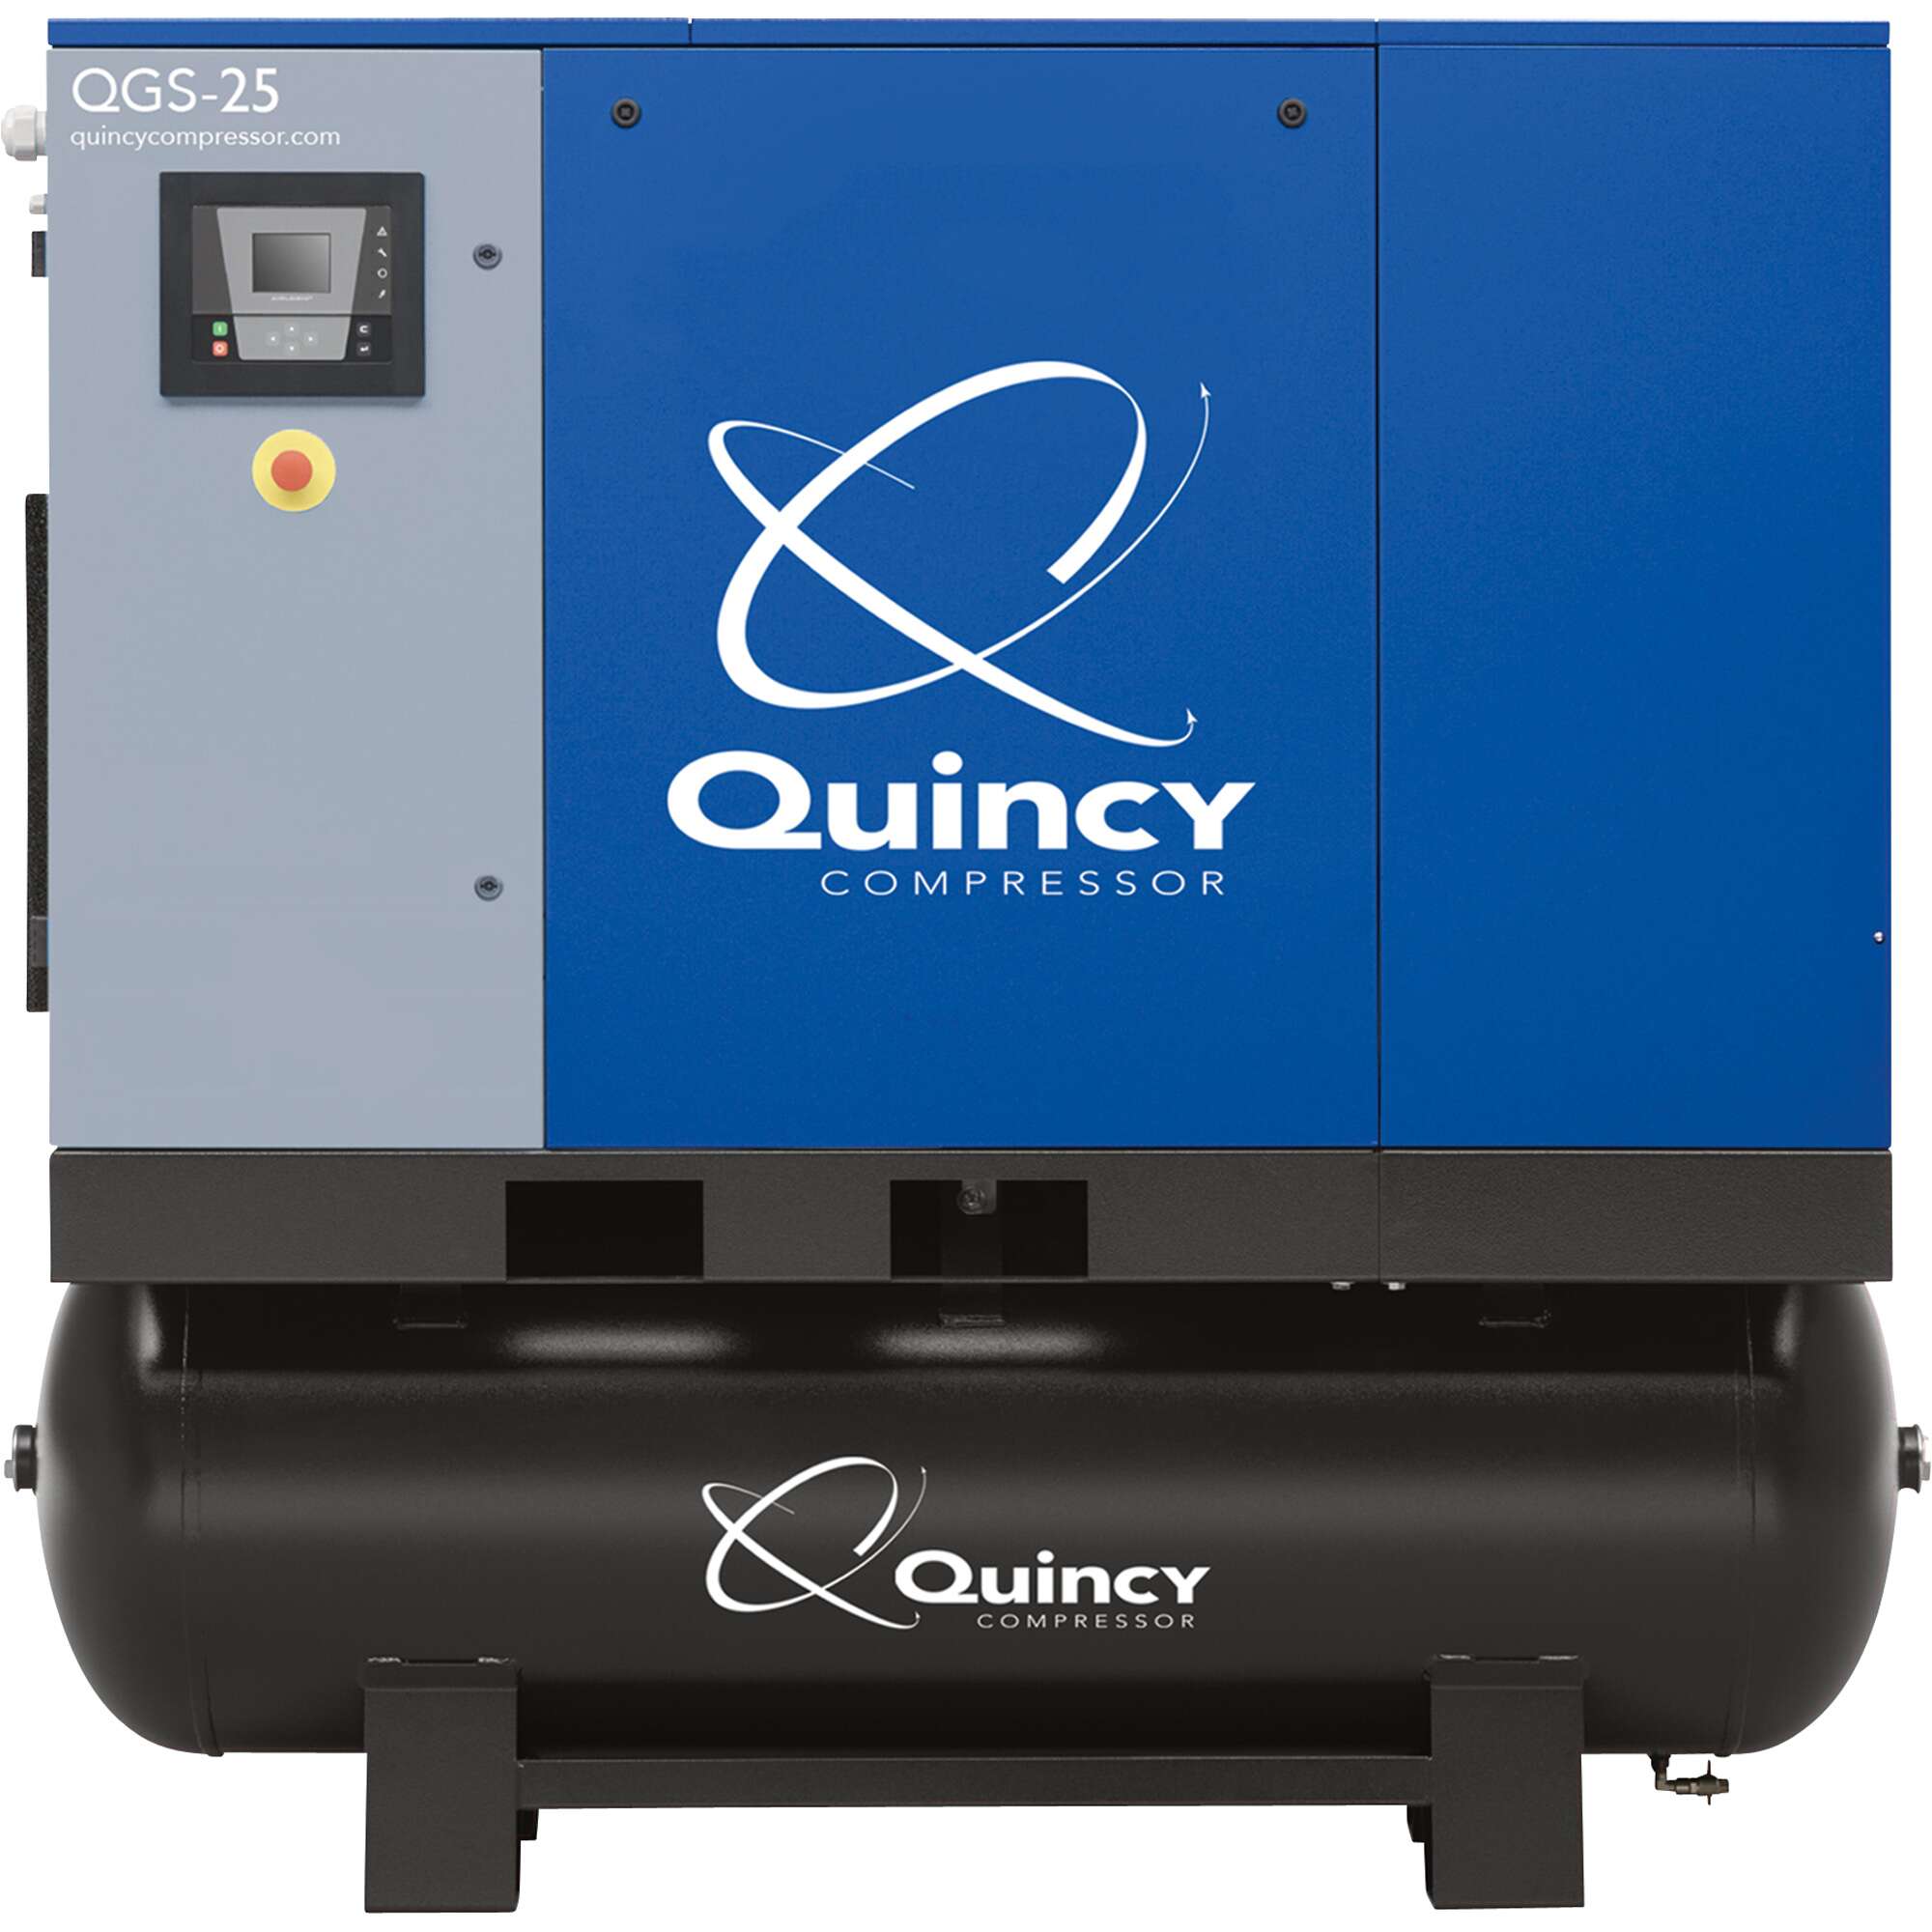 Quincy QGS Rotary Screw Compressor with Dryer 30 HP 208 230 460V 3Phase 120 Gallon 113.8 CFM